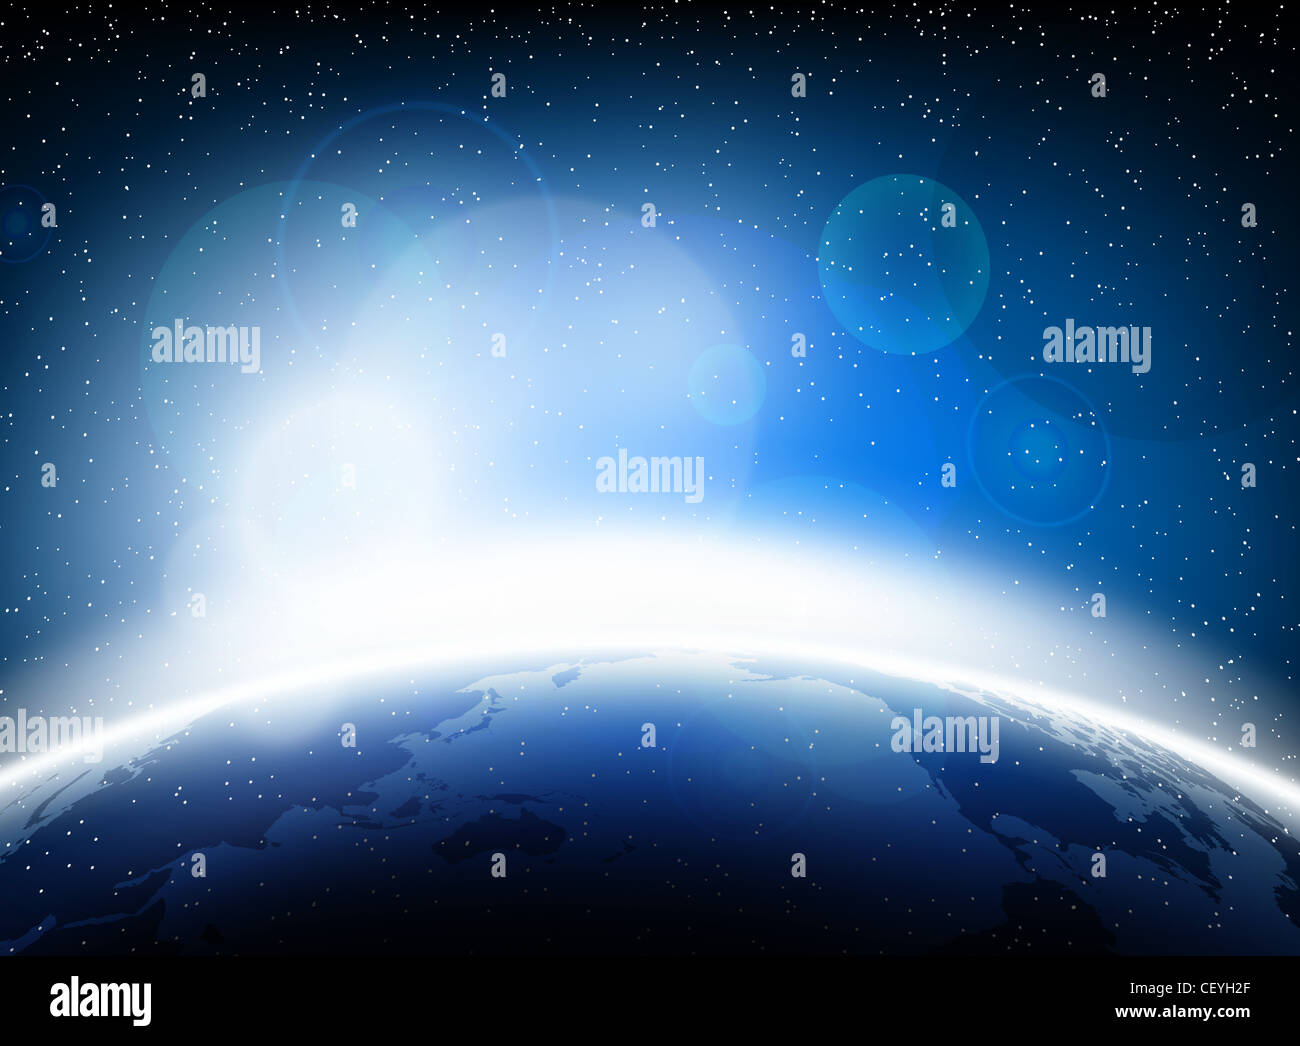 Illustration with Earth in space, light rays and stars Stock Photo